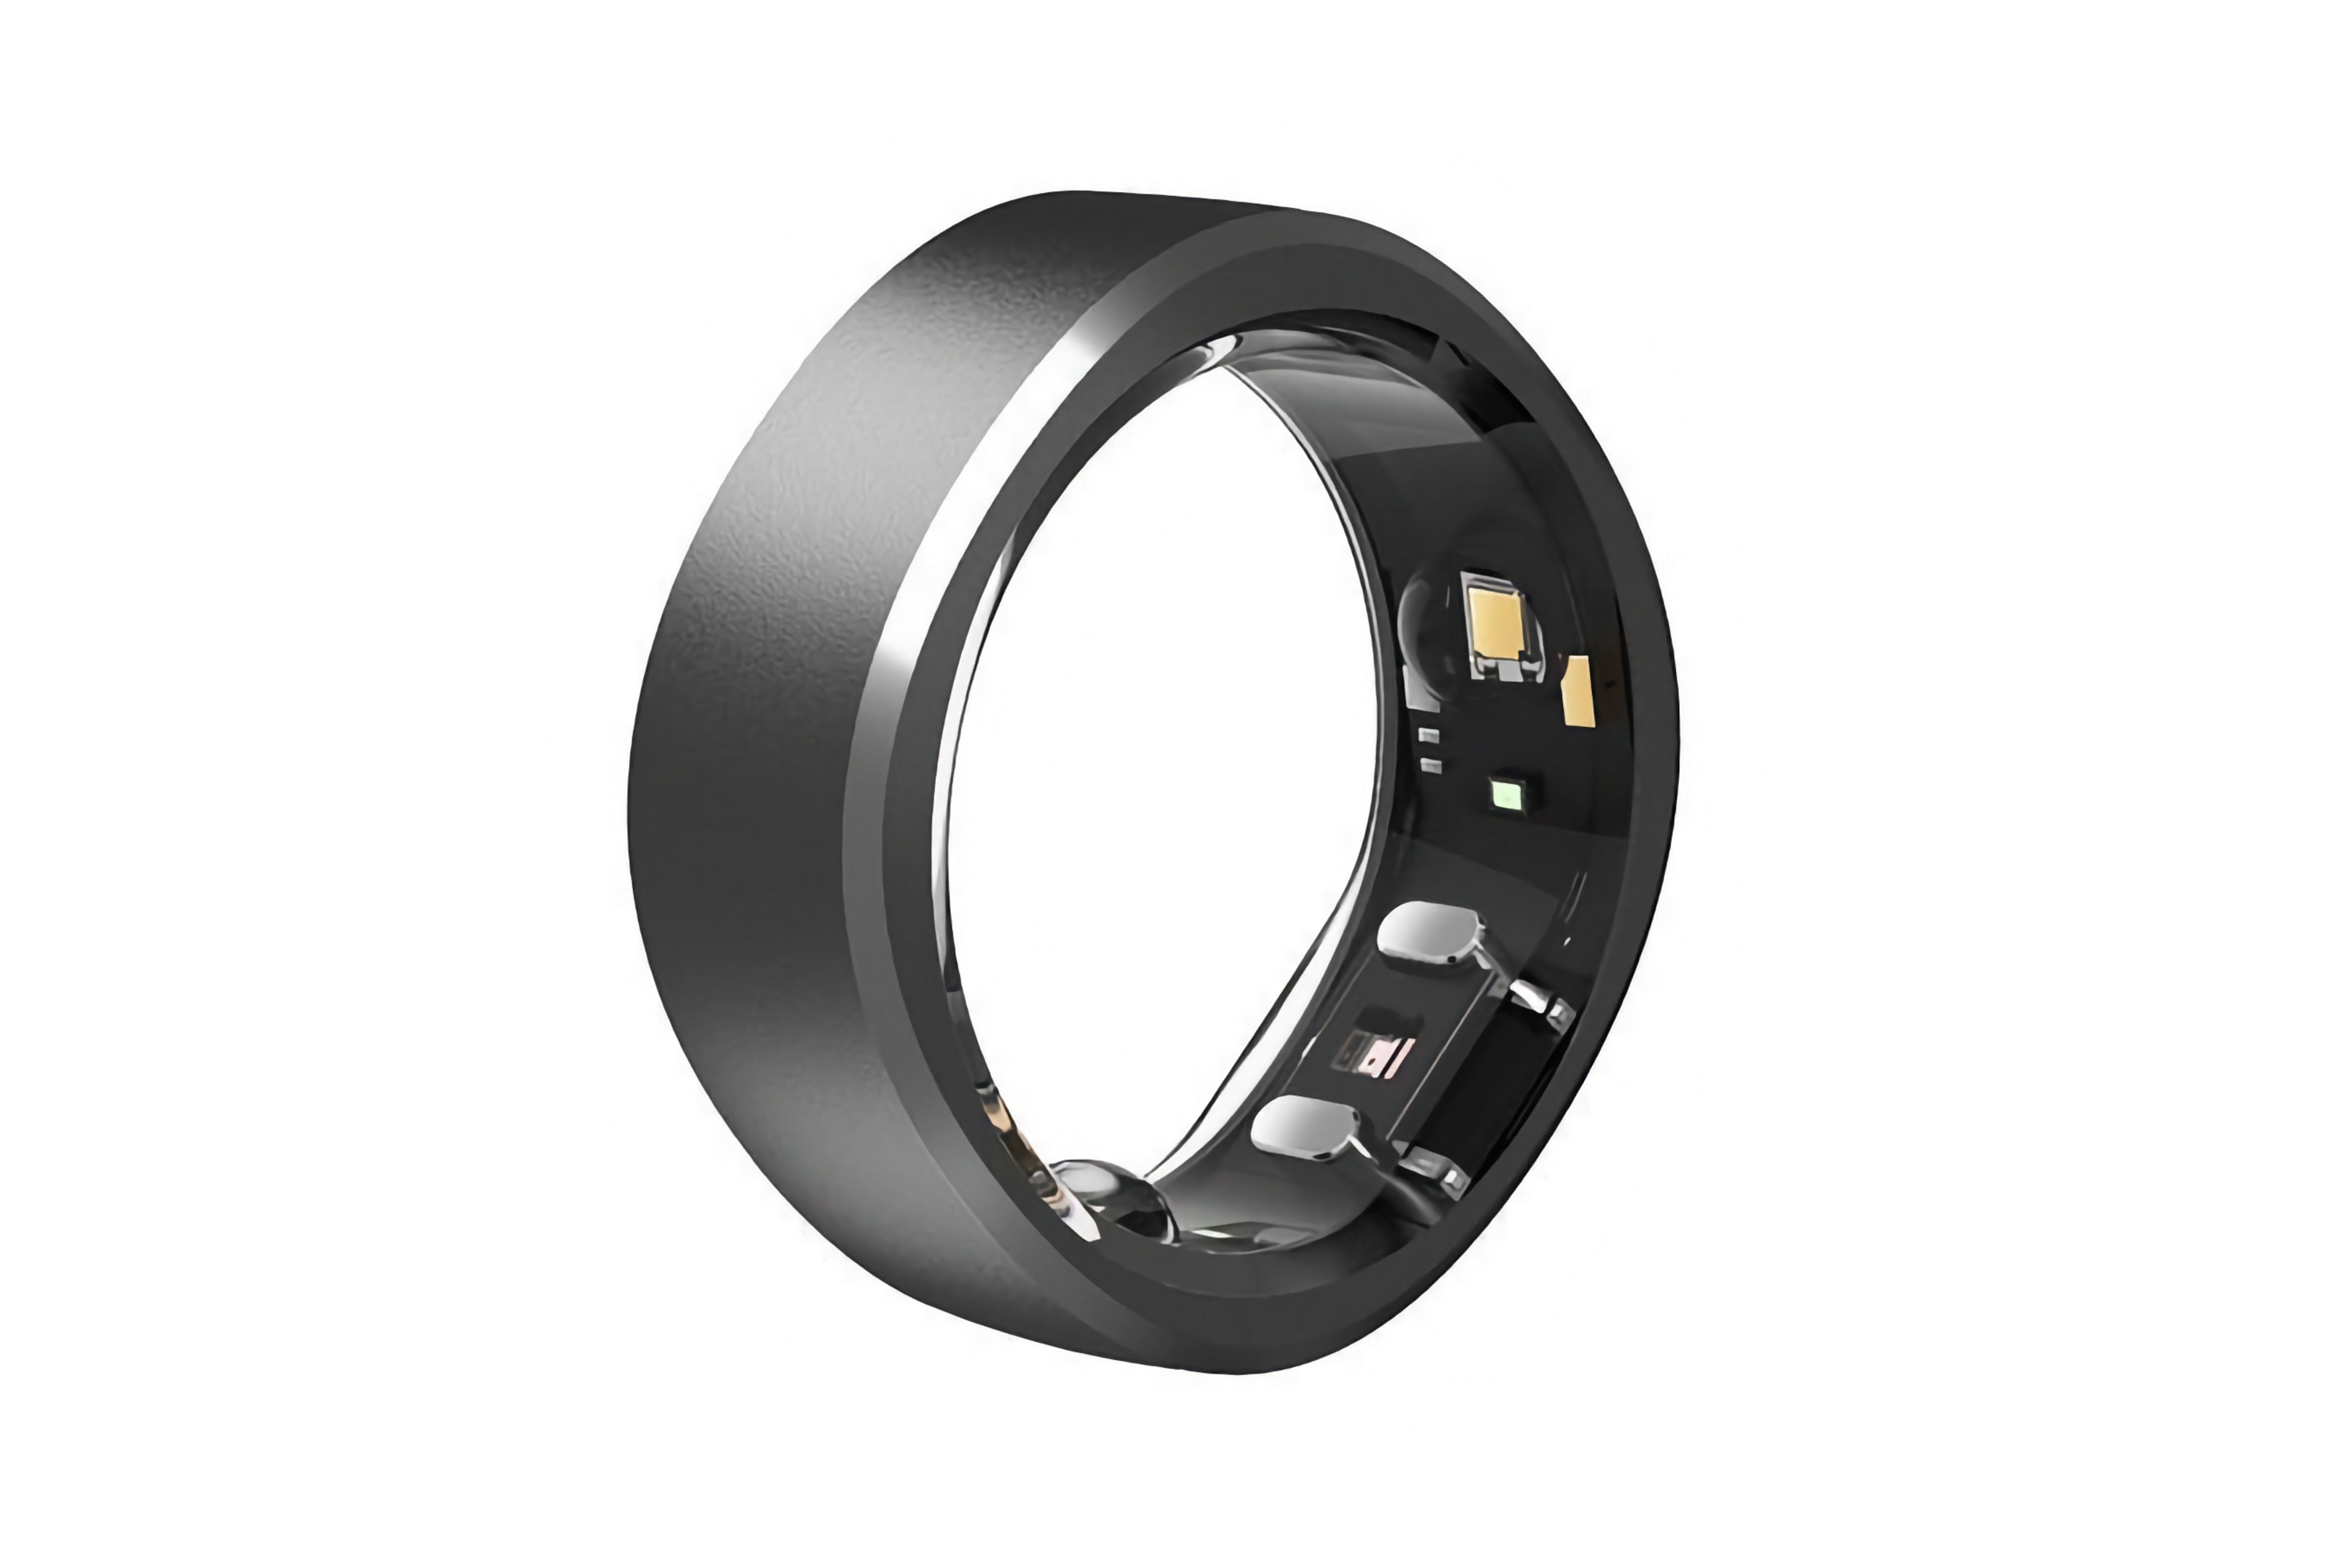 5 Best Smart Rings of 2022 - Top-Tested Fitness Tracker Rings